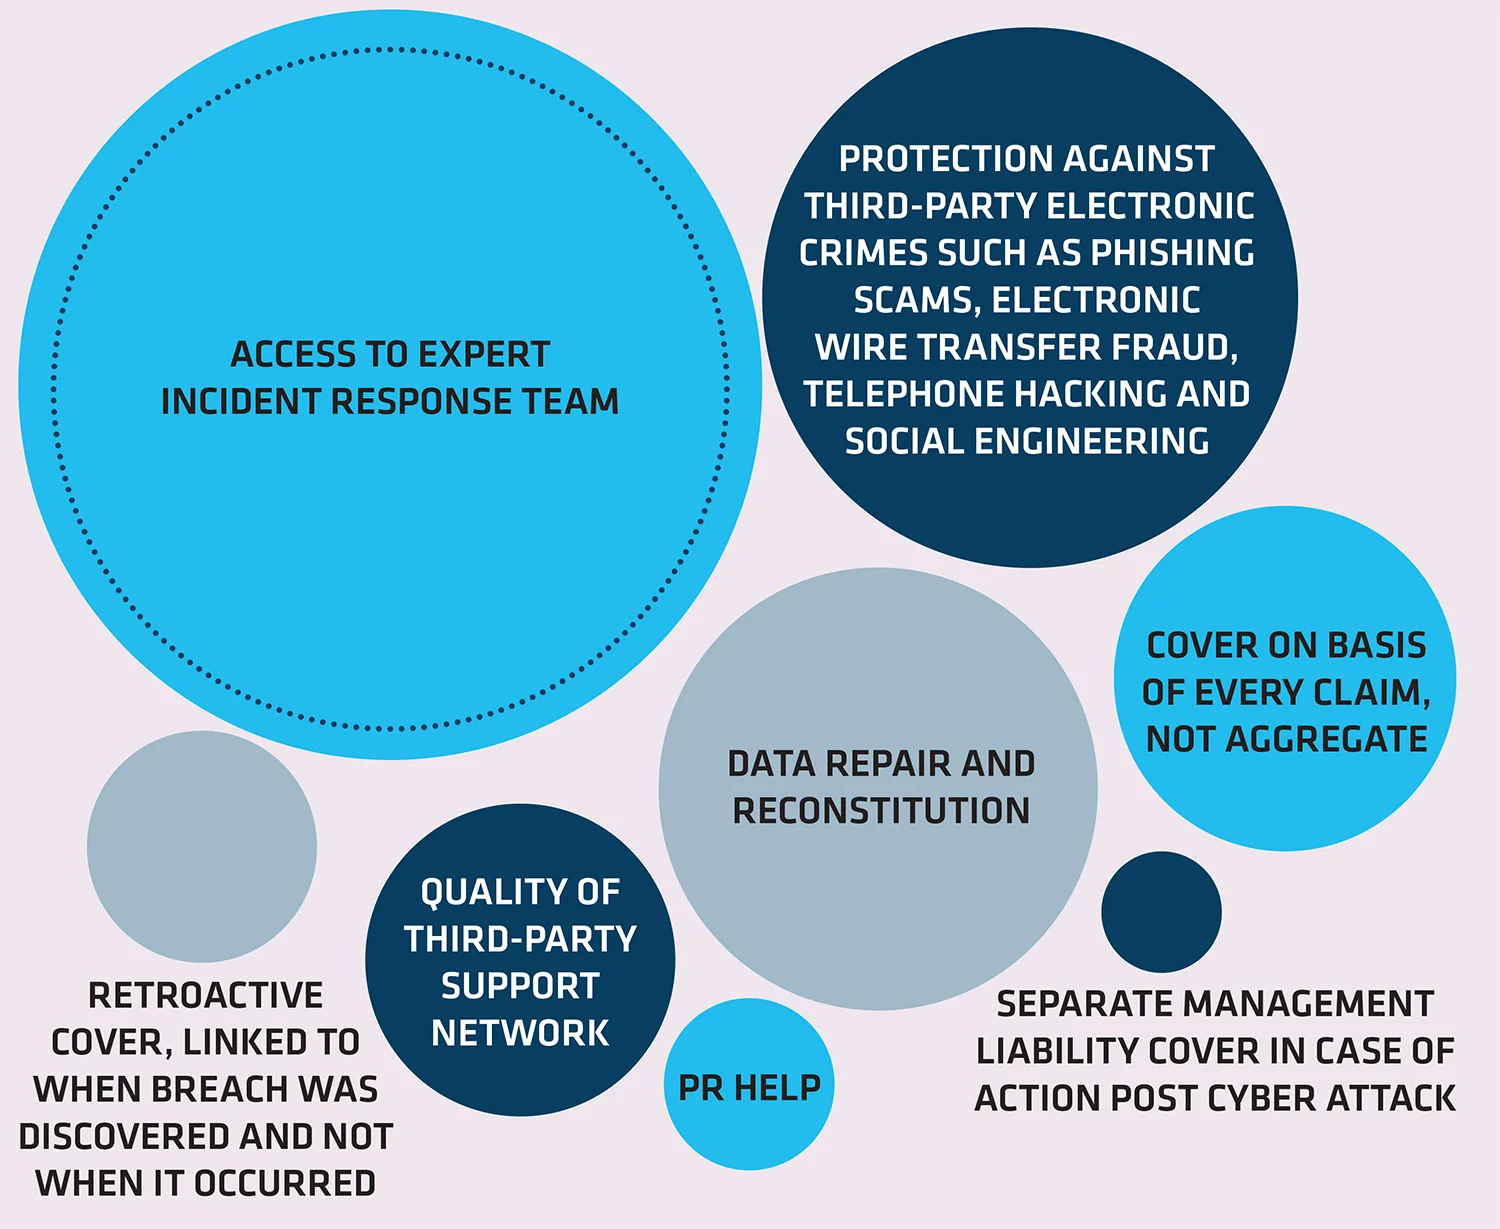 7 THE MOST IMPORTANT FACTORS FOR A CYBER POLICY